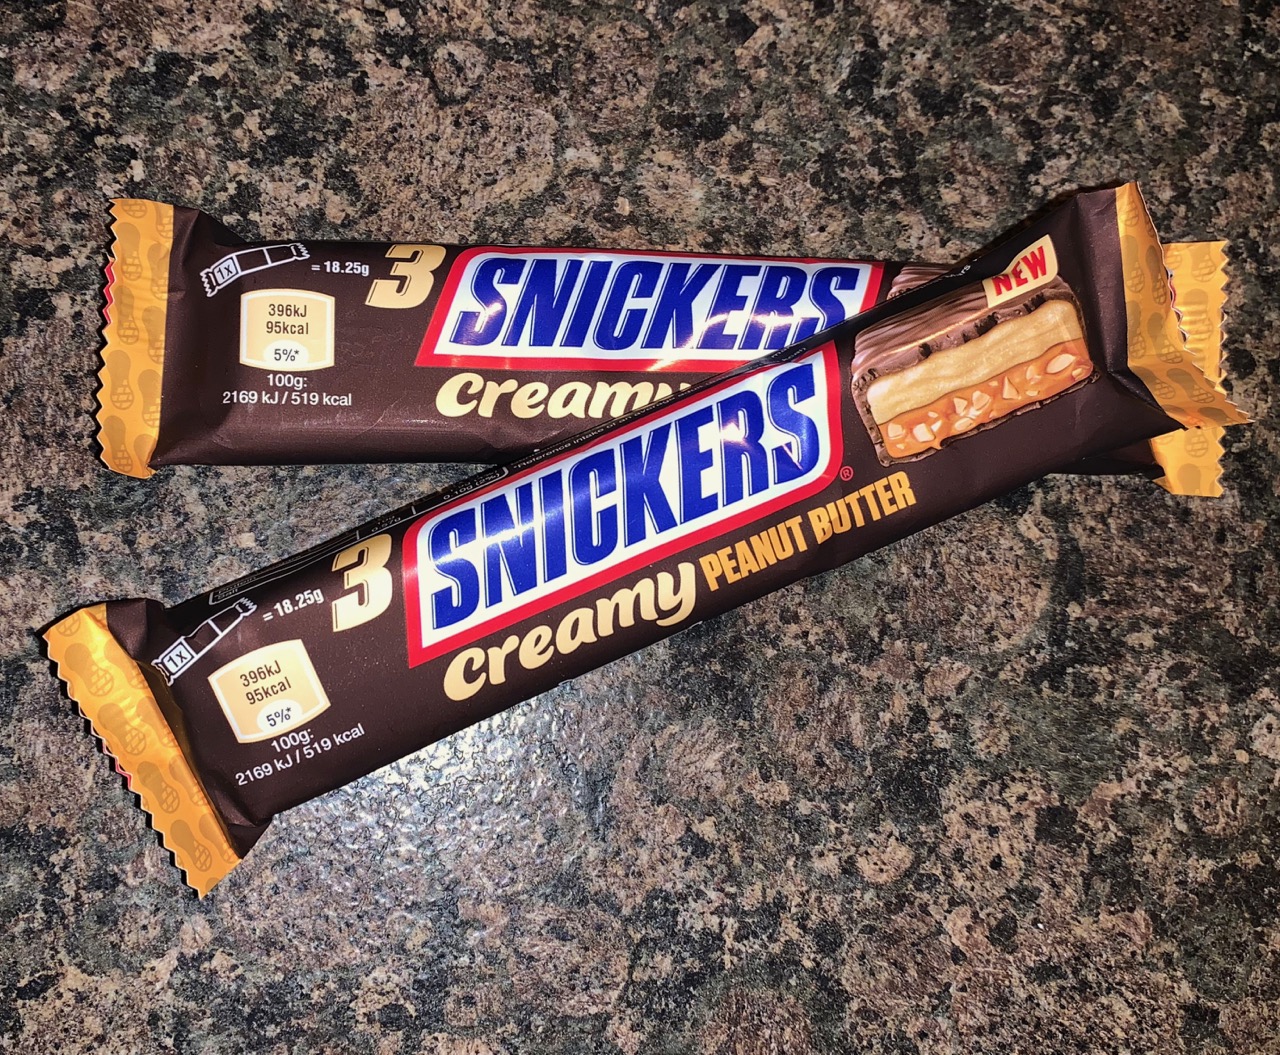 FOODSTUFF FINDS: Snickers Creamy Peanut Butter (Tesco) By @Cinabar